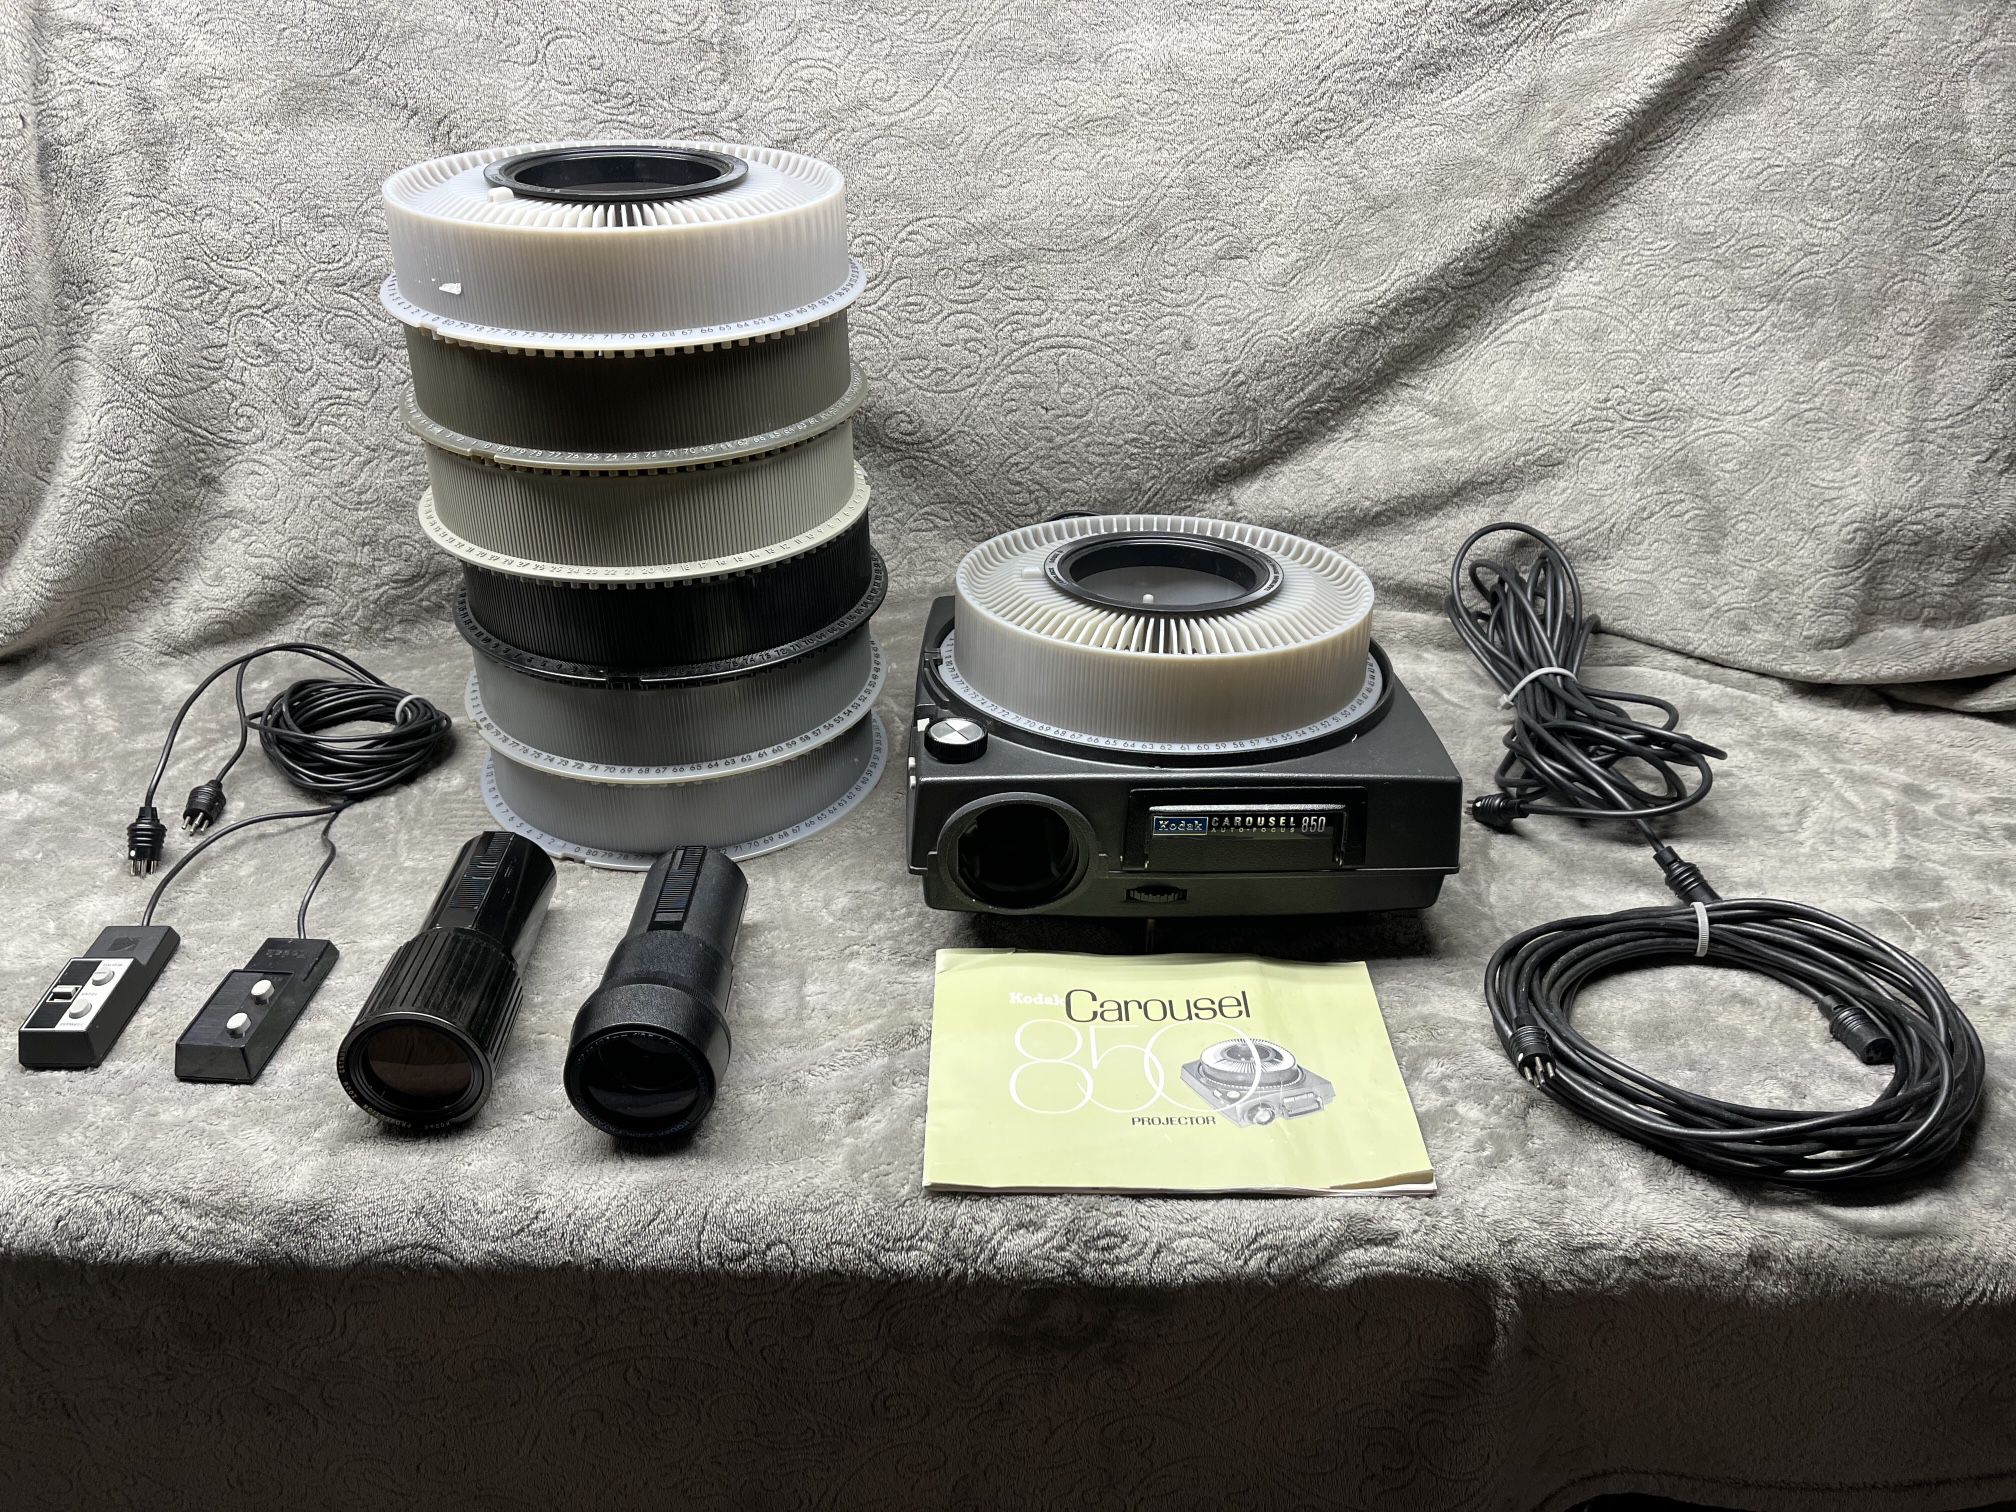 Kodak Carousel 850 Autofocus Slide Projector With 2 Lens - 102-152 Mm F3.5/and 4.6 Inch F3.5. Also Included - 2 Remotes, 2 Extension Cables, 7 Carouse